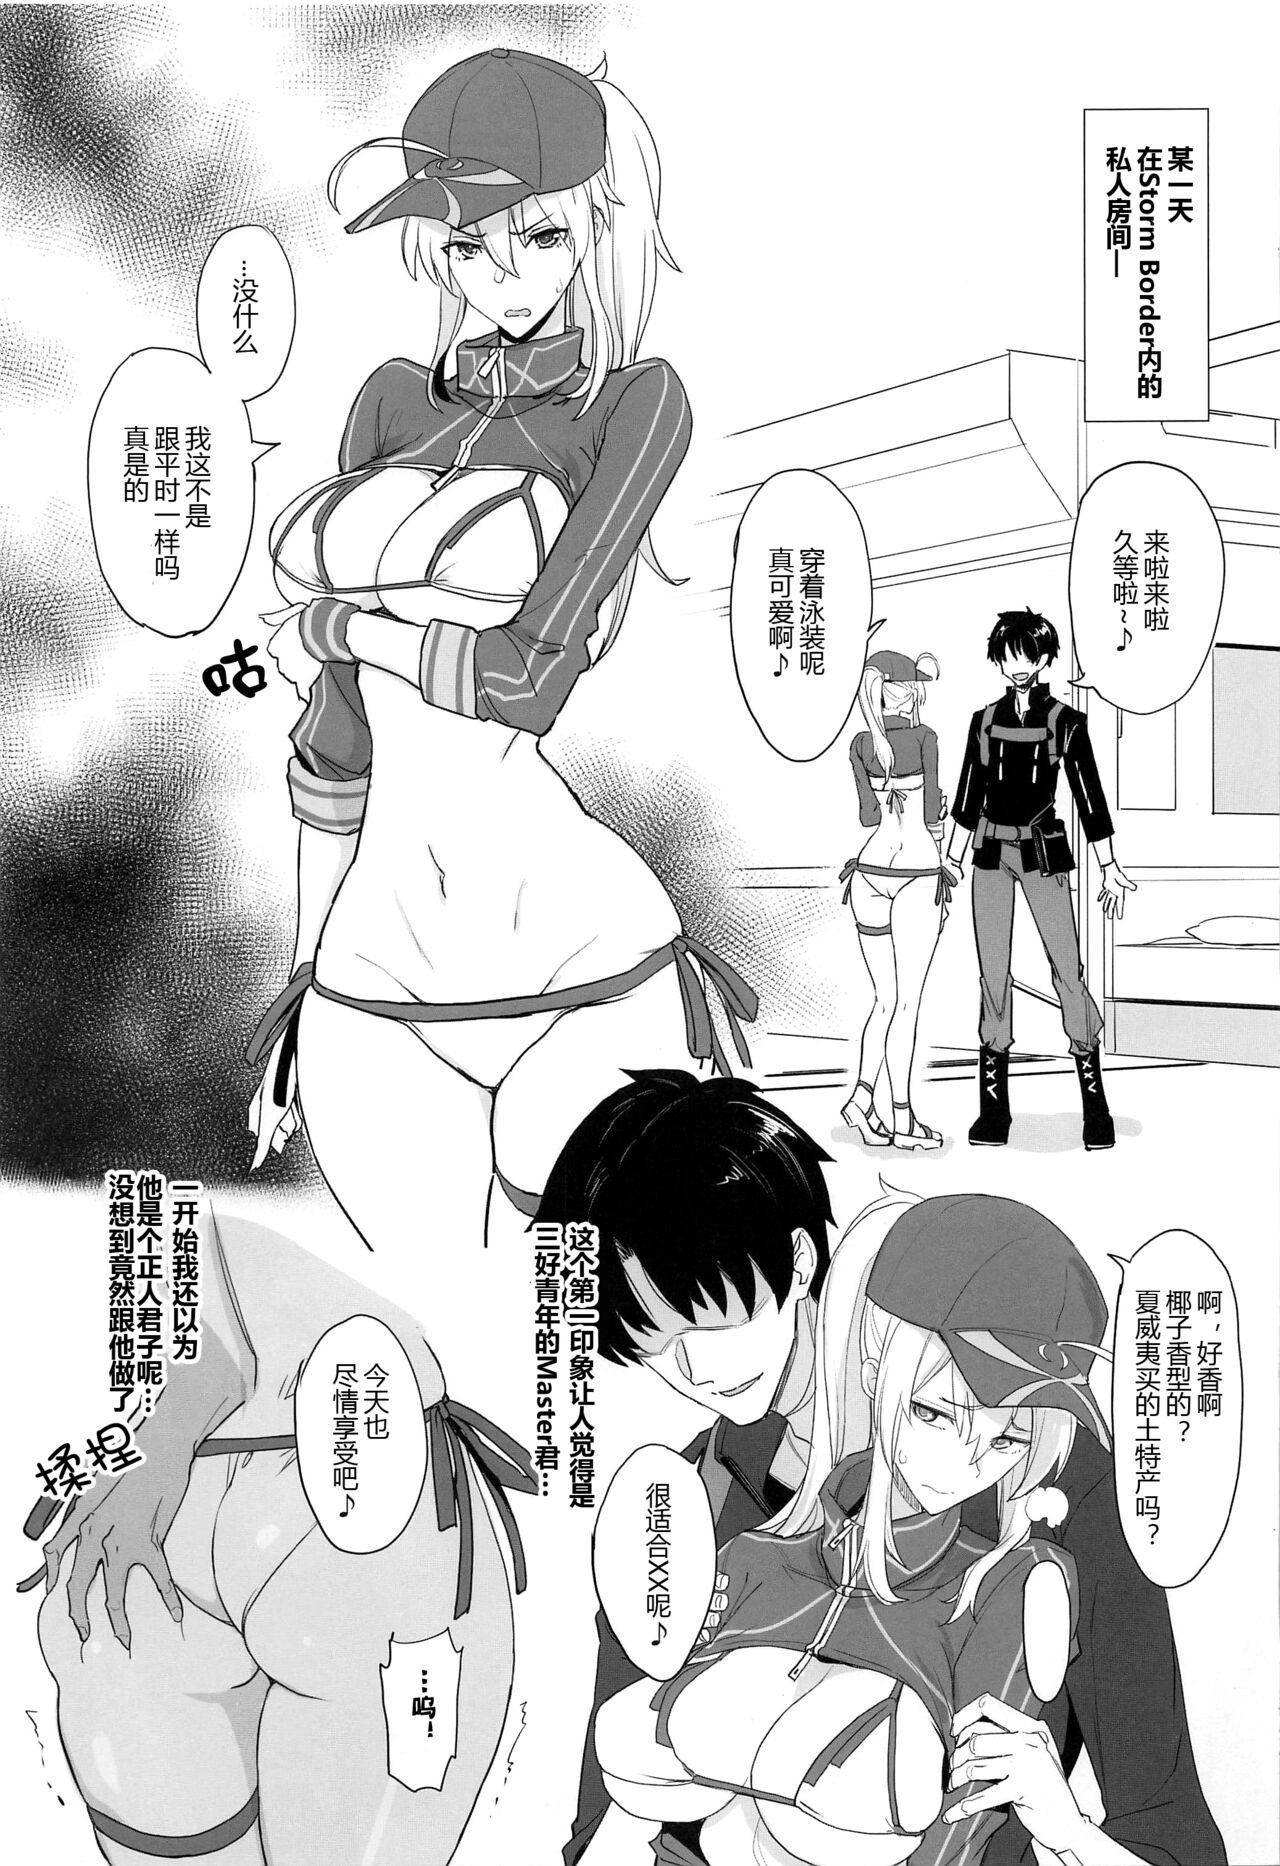 Fit FGOnoerohonα - Fate grand order Salope - Page 3